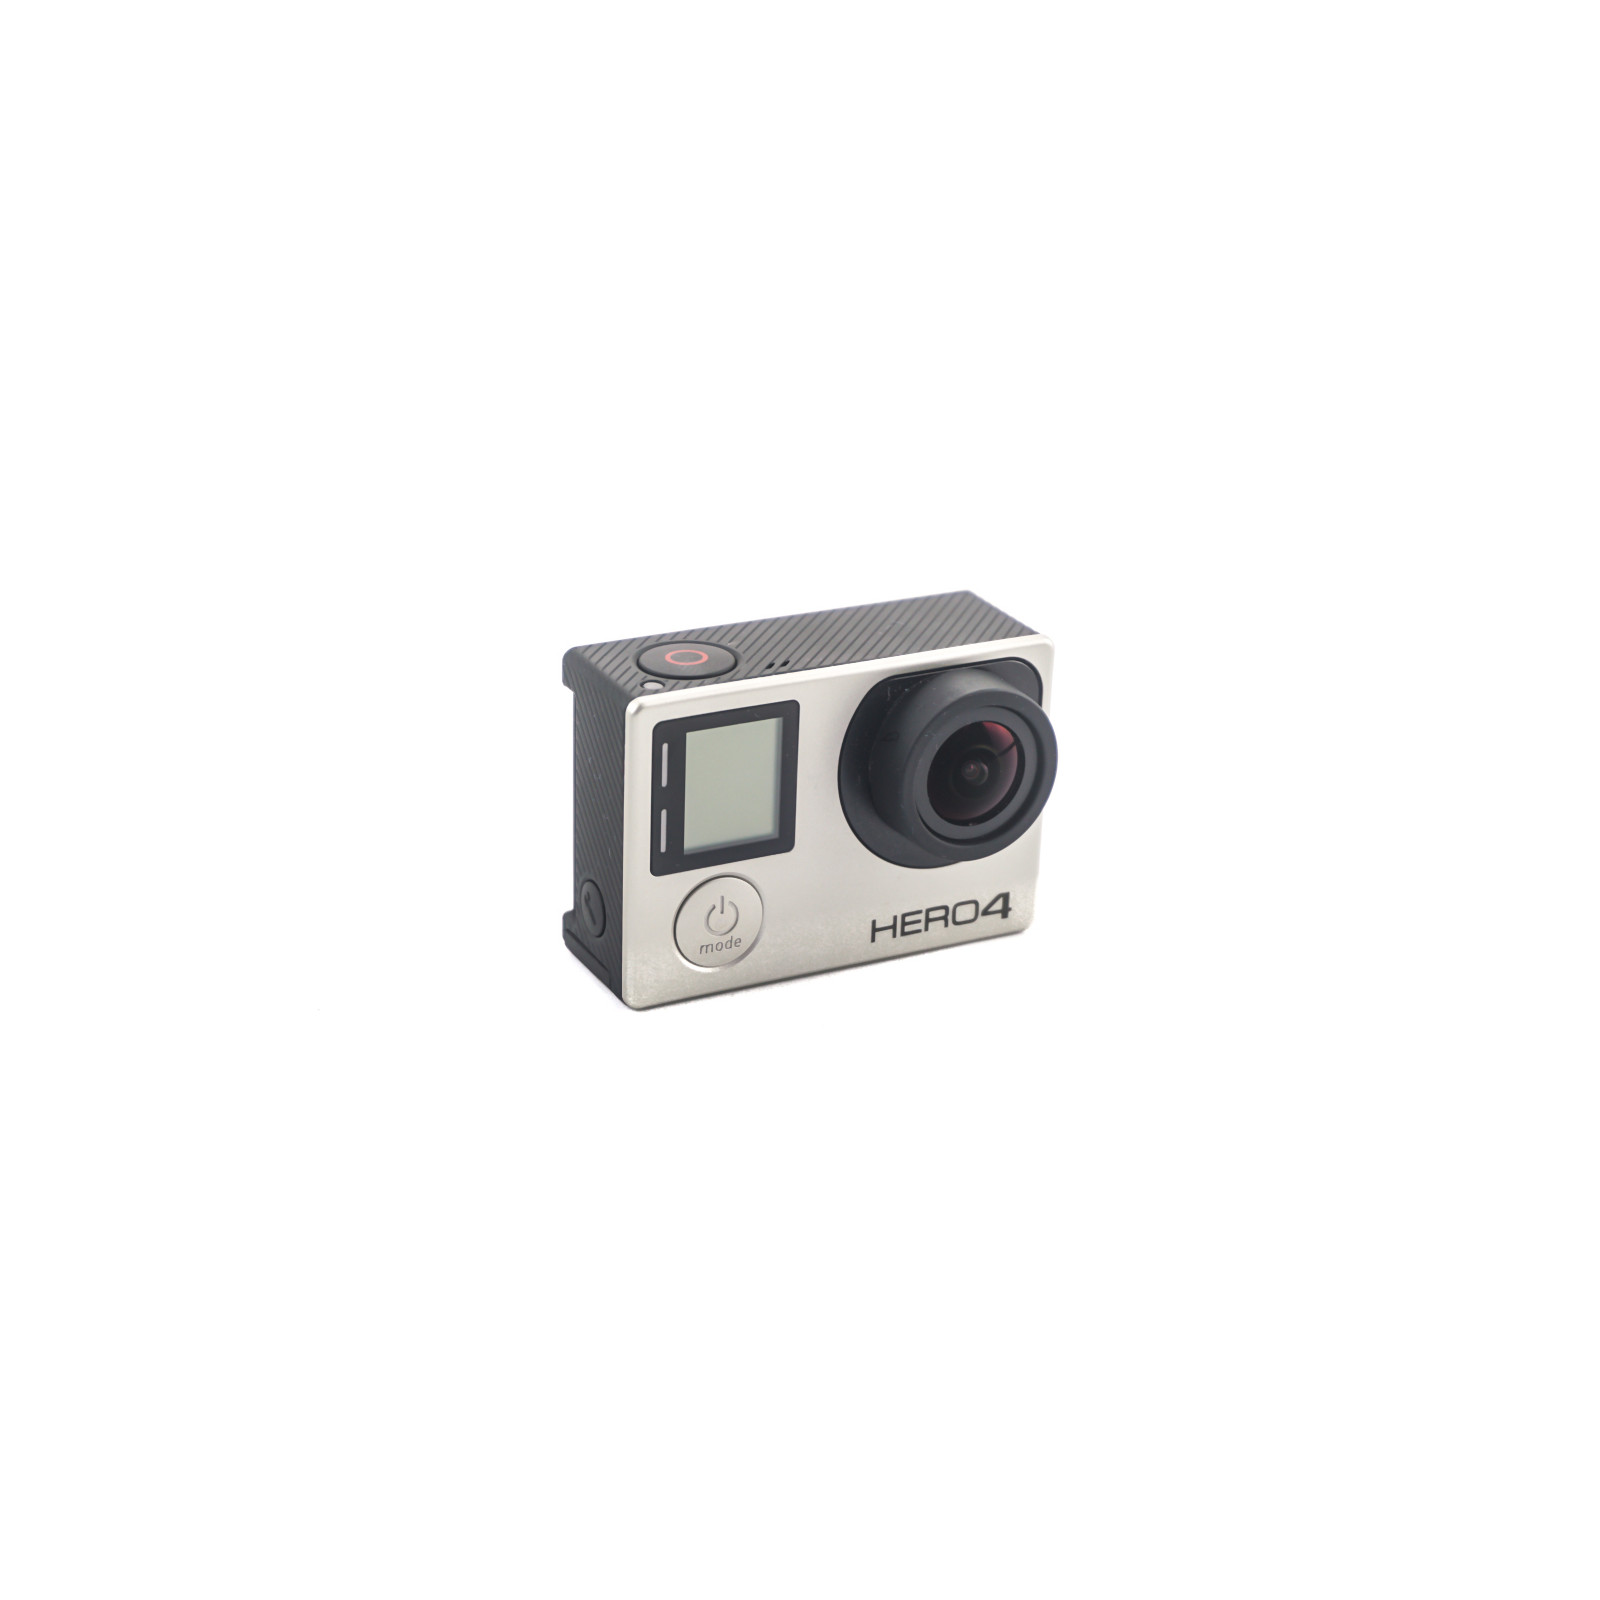 Gopro Hero 4 Silver Action Camera Used Description Features Low Price In Ukraine Pickup In Odessa Wazza Com Ua